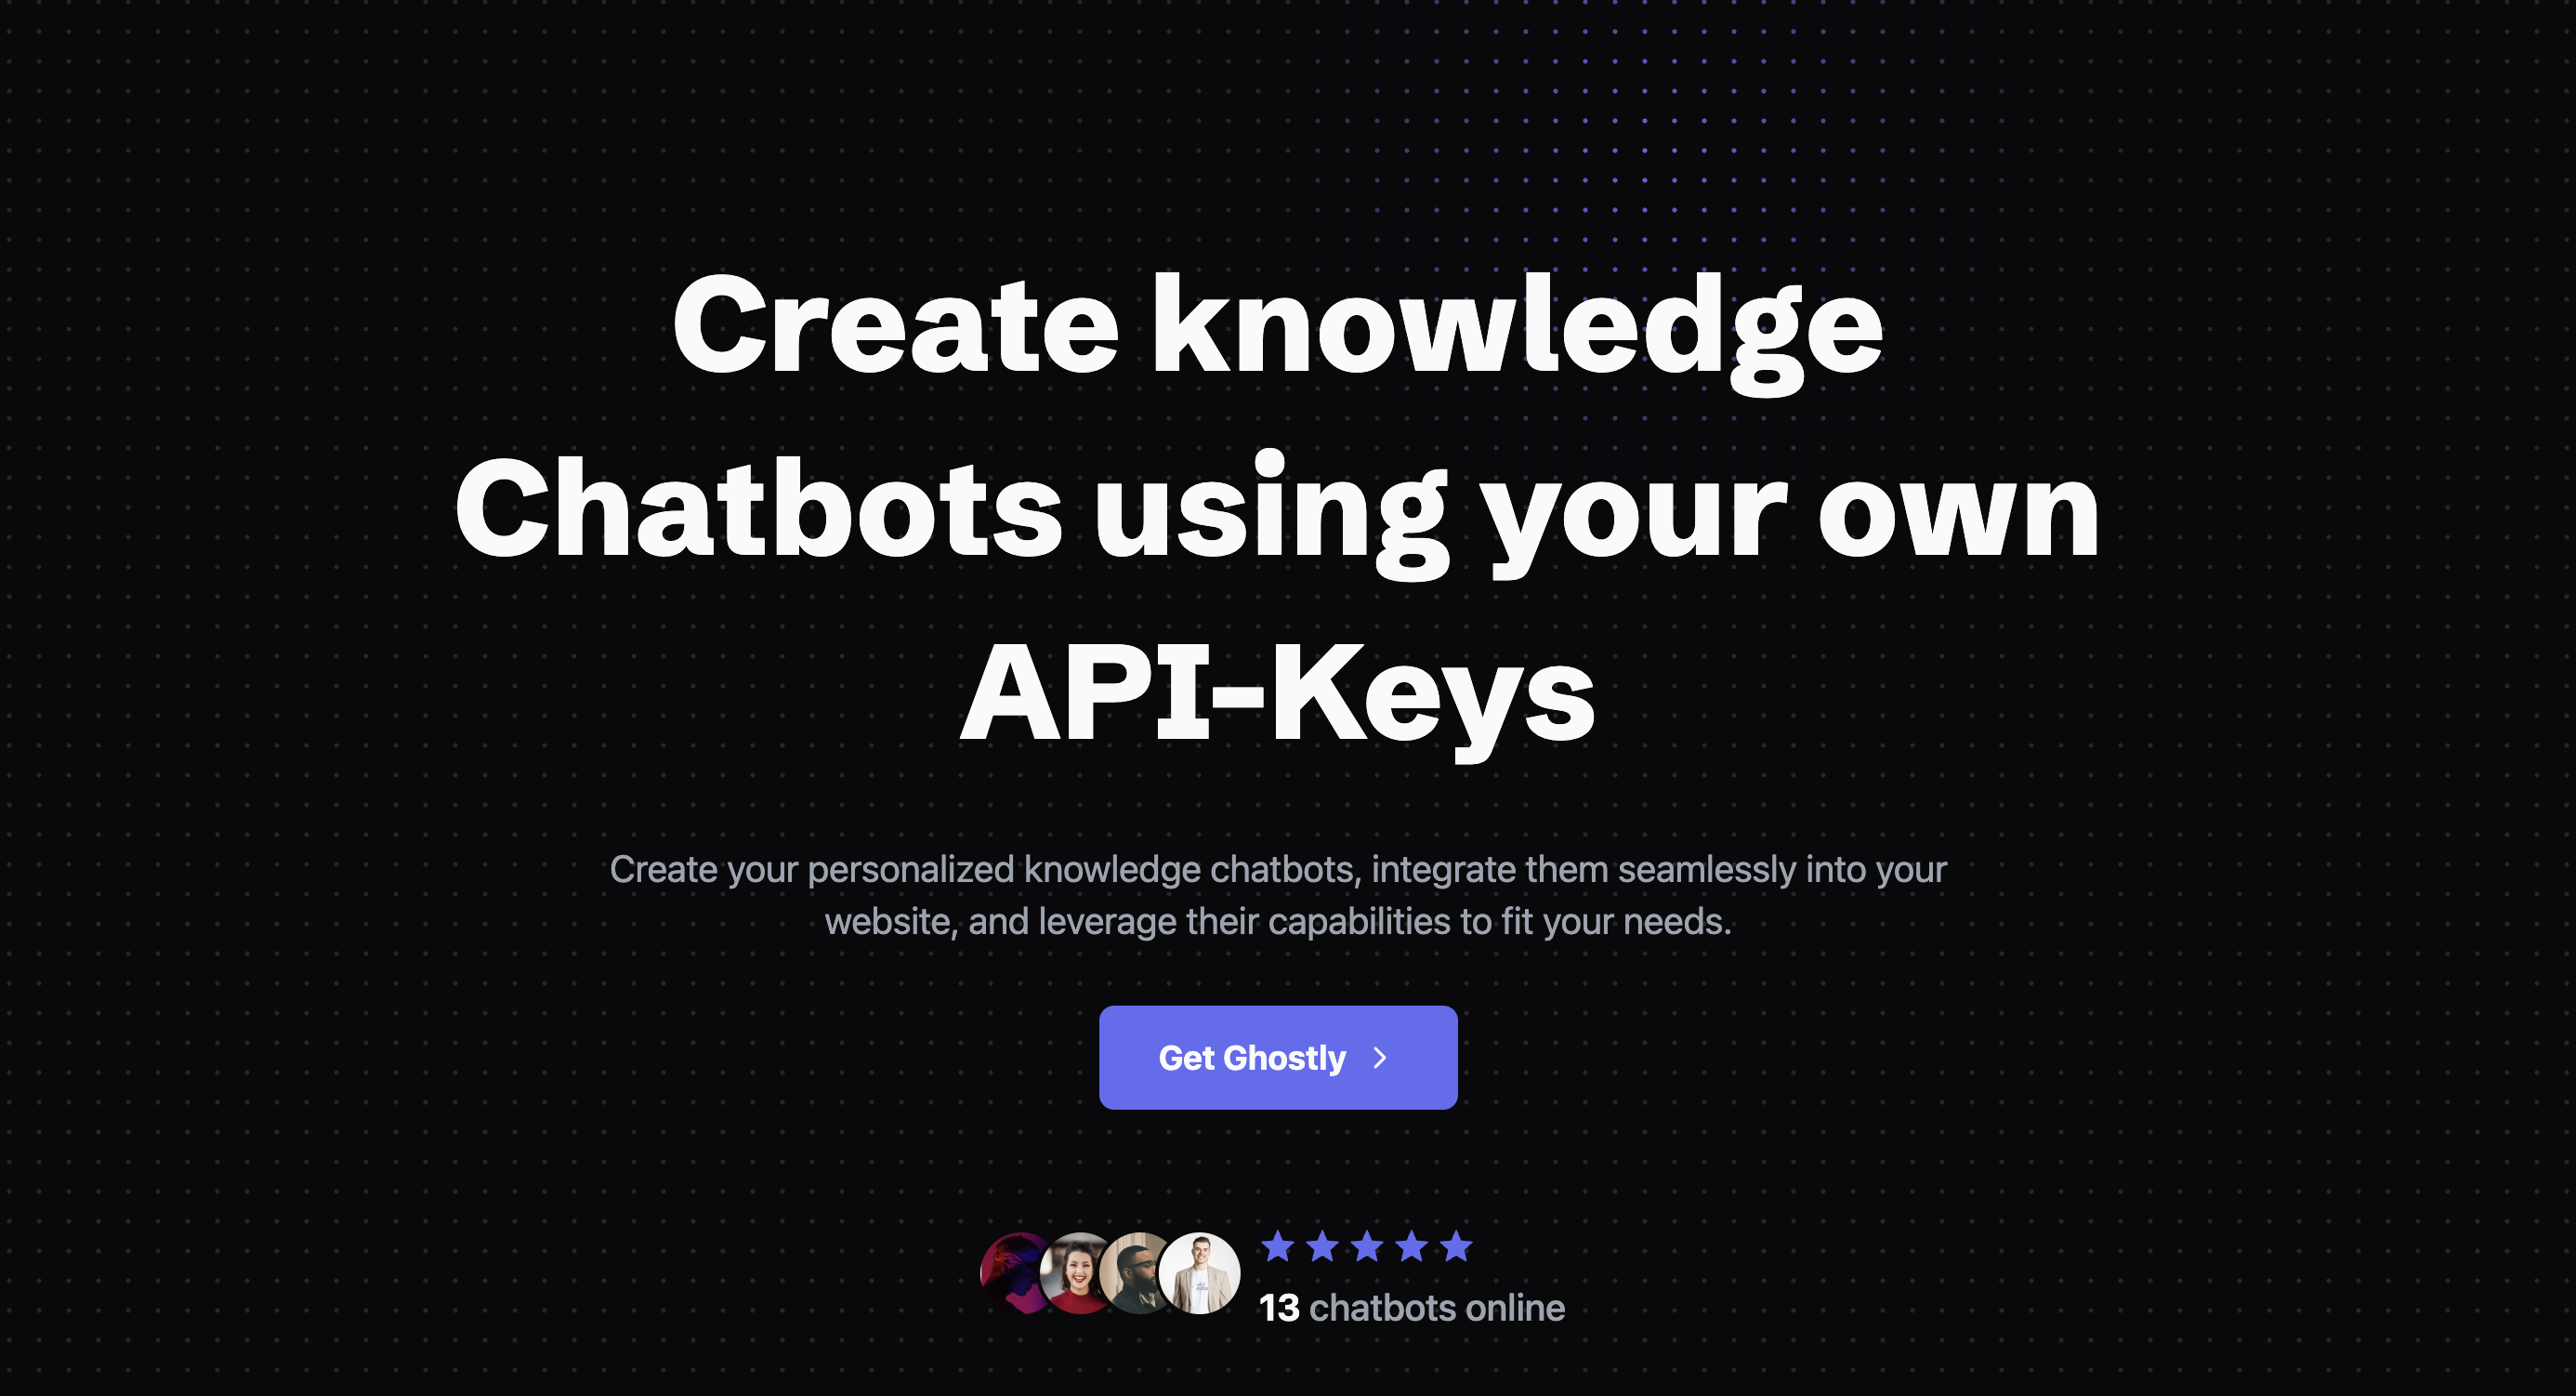 ghostly-chat - Create knowledge chatbots using your own API Key